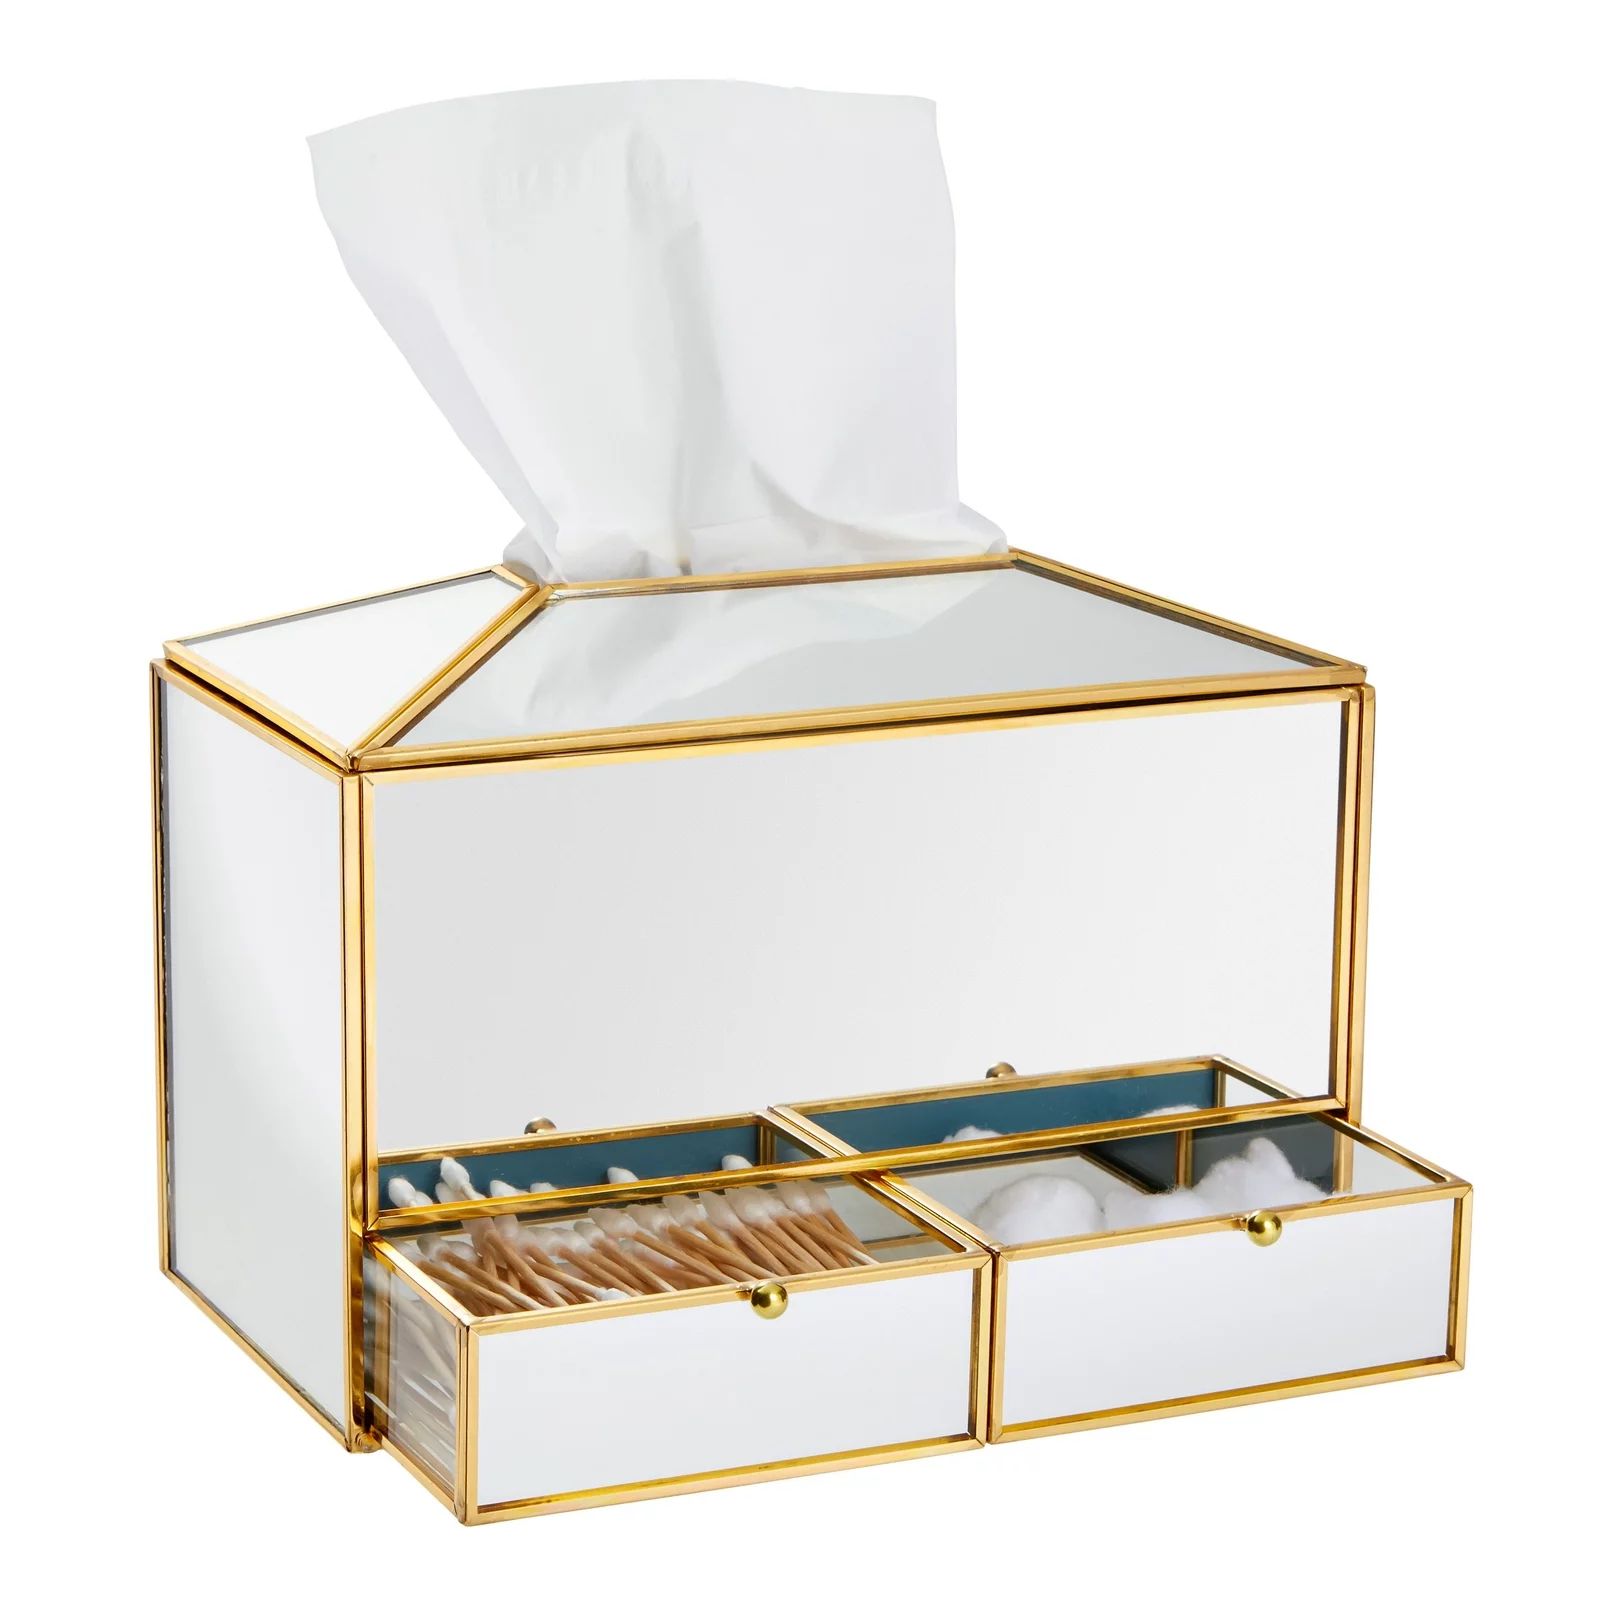 Mirrored Gold Tissue Box Cover with 2 Drawer Compartments, Rectangular Decorative Tissue Box Hold... | Walmart (US)